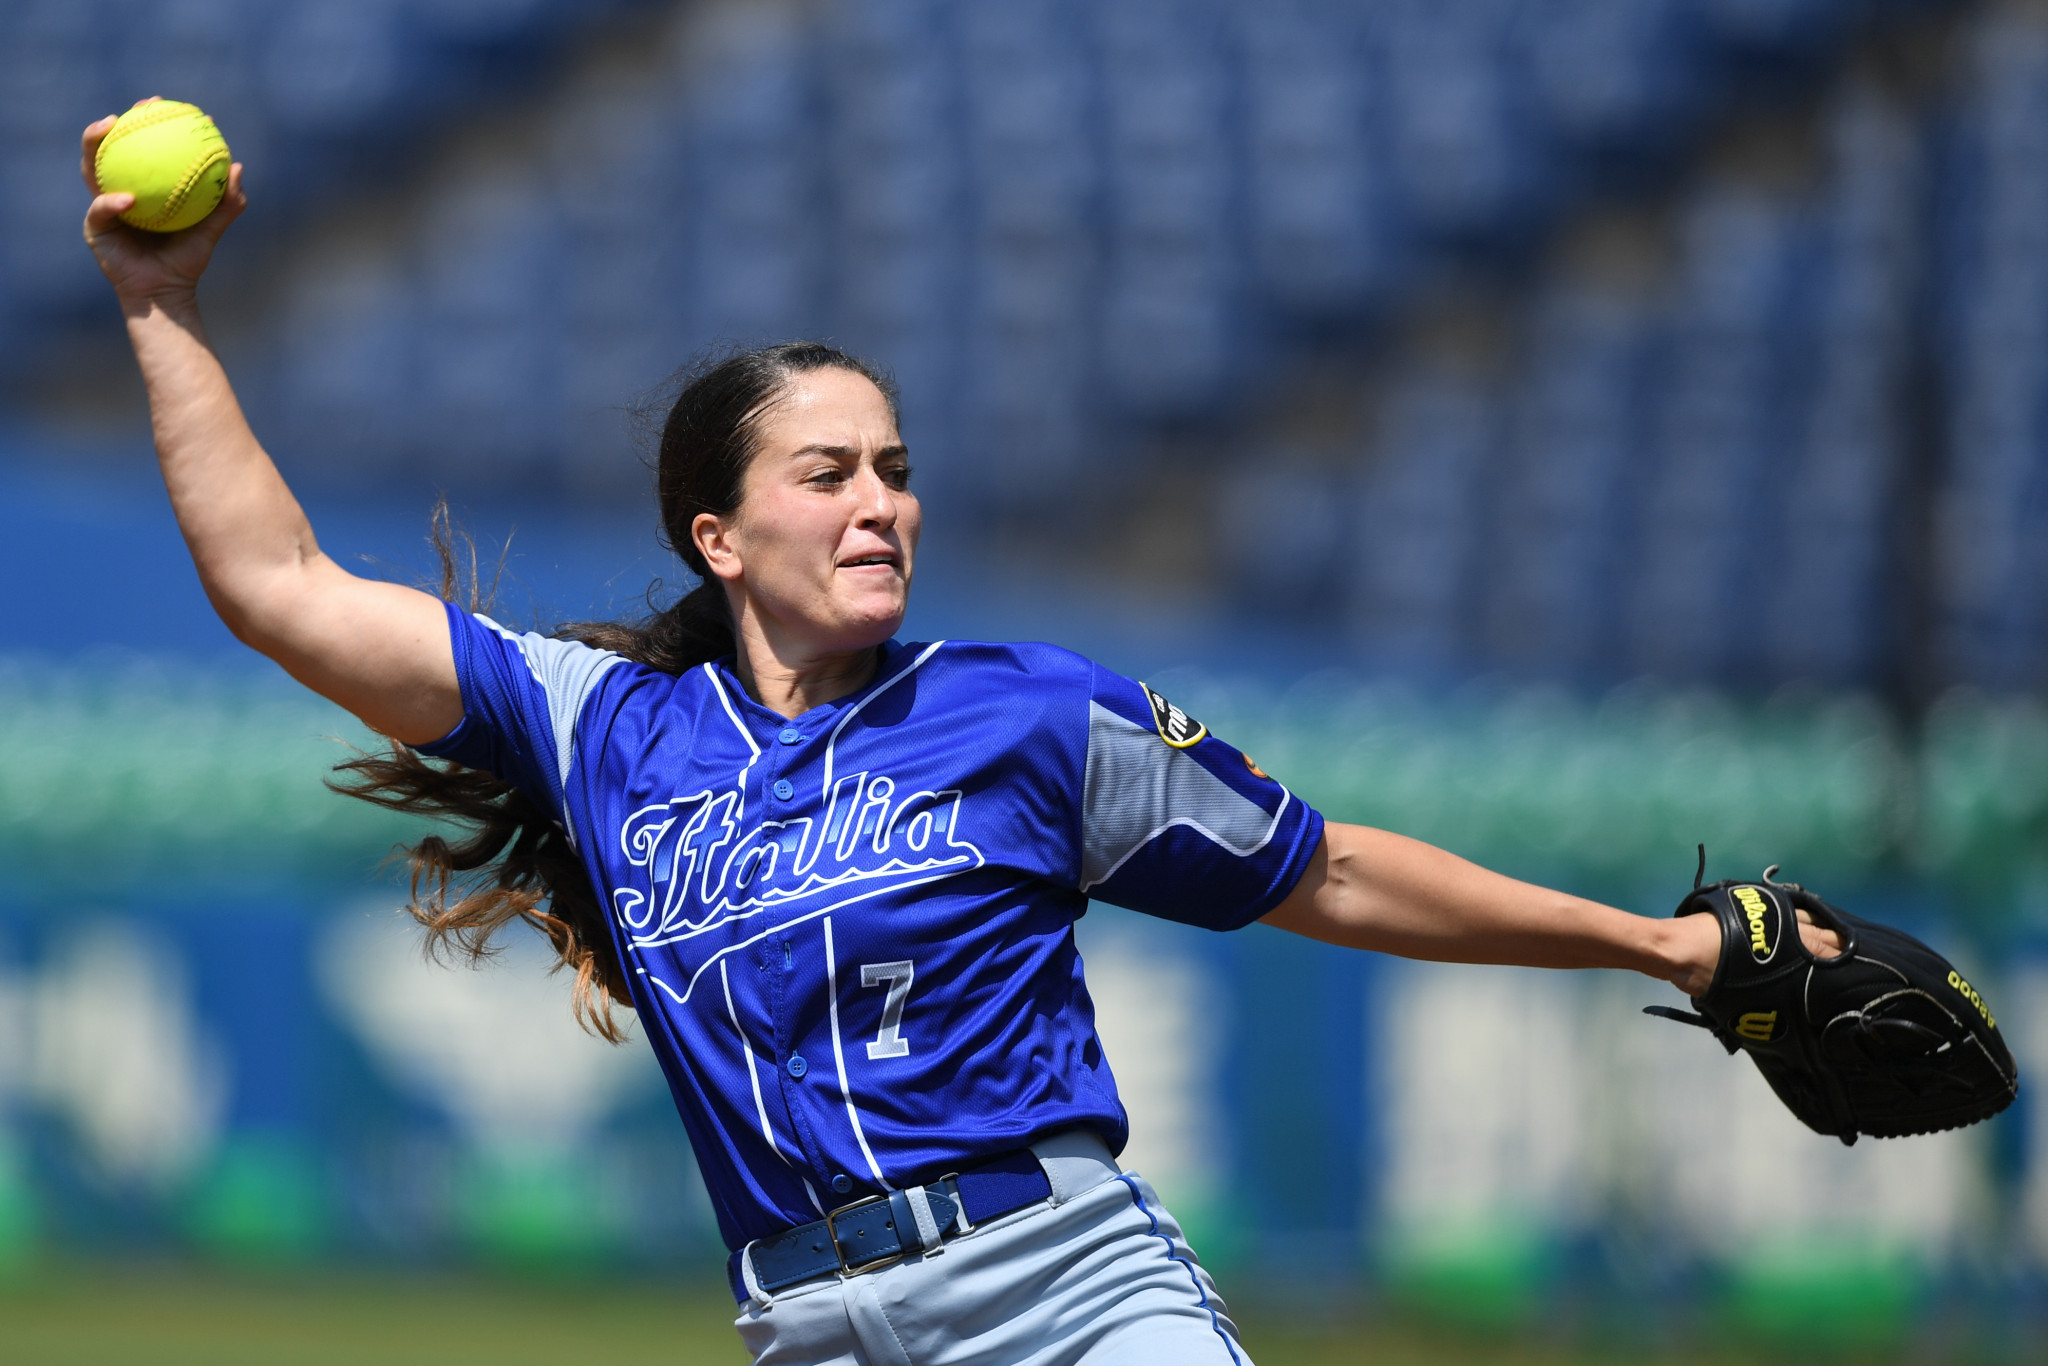 Softball Europe cancels youth event but pressing on with remainder of 2021 calendar